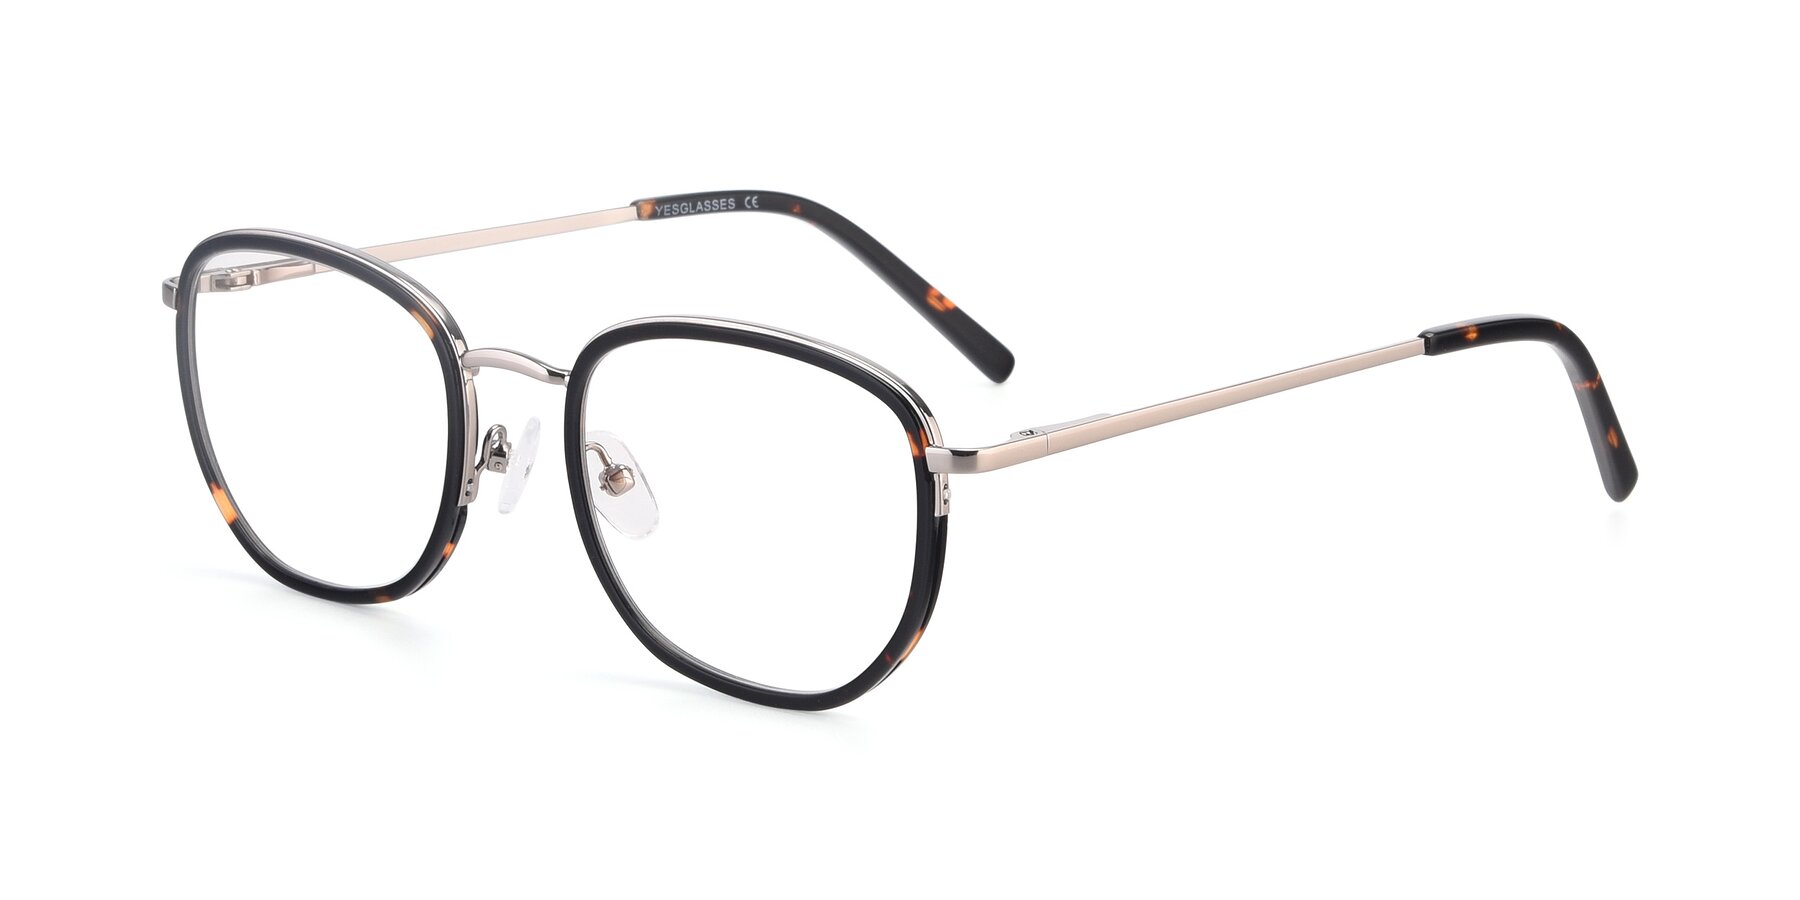 Angle of 17702 in Silver-Tortoise with Clear Reading Eyeglass Lenses